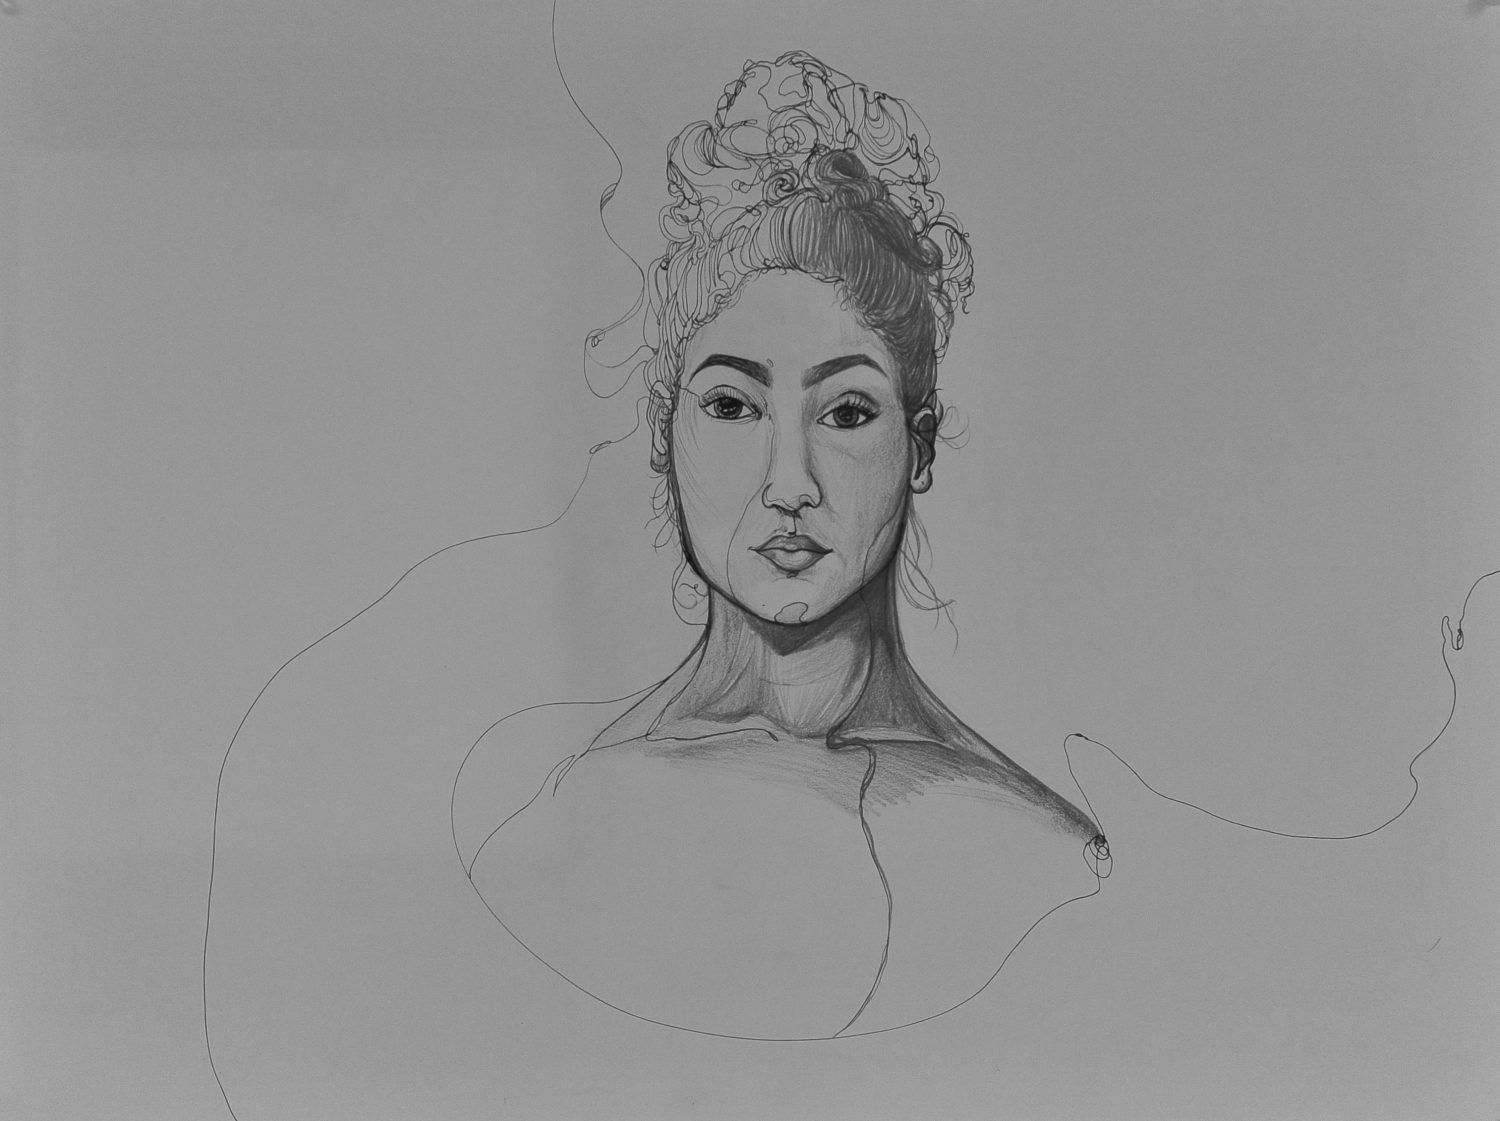 thumbnail of Look At Me by Christina Ryan. Medium: Graphite and Ink on Paper. Size 18 x 24 inches Date 2014